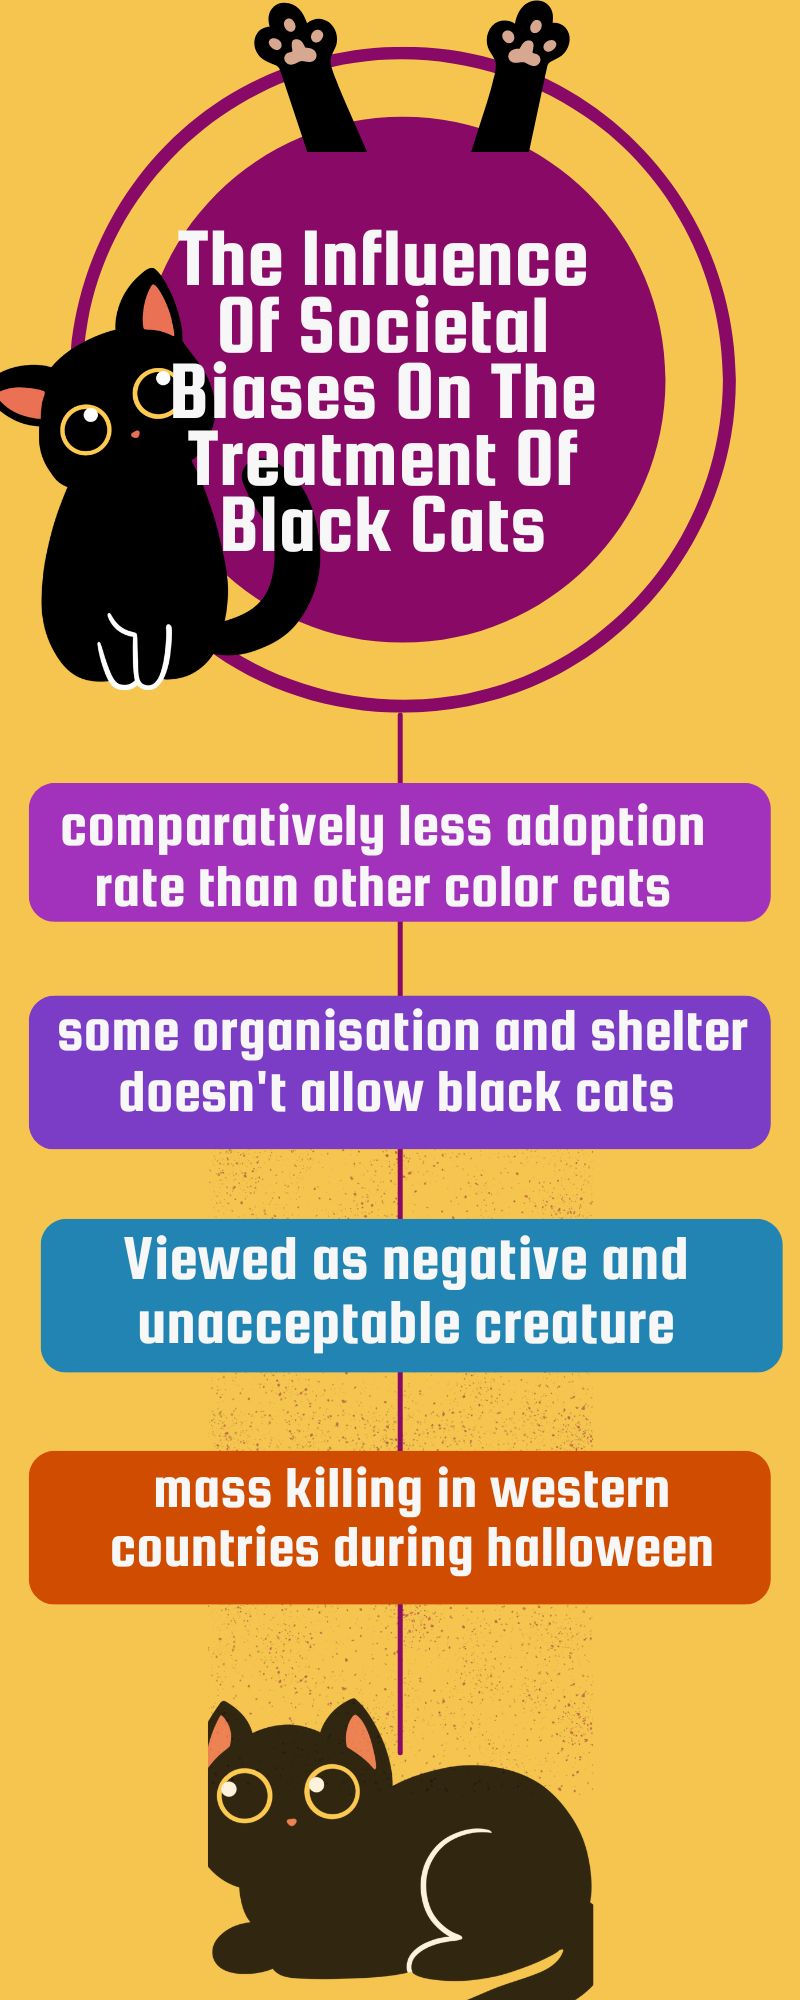 The Influence Of Societal Biases On The Treatment Of Black Cats (Infographic)